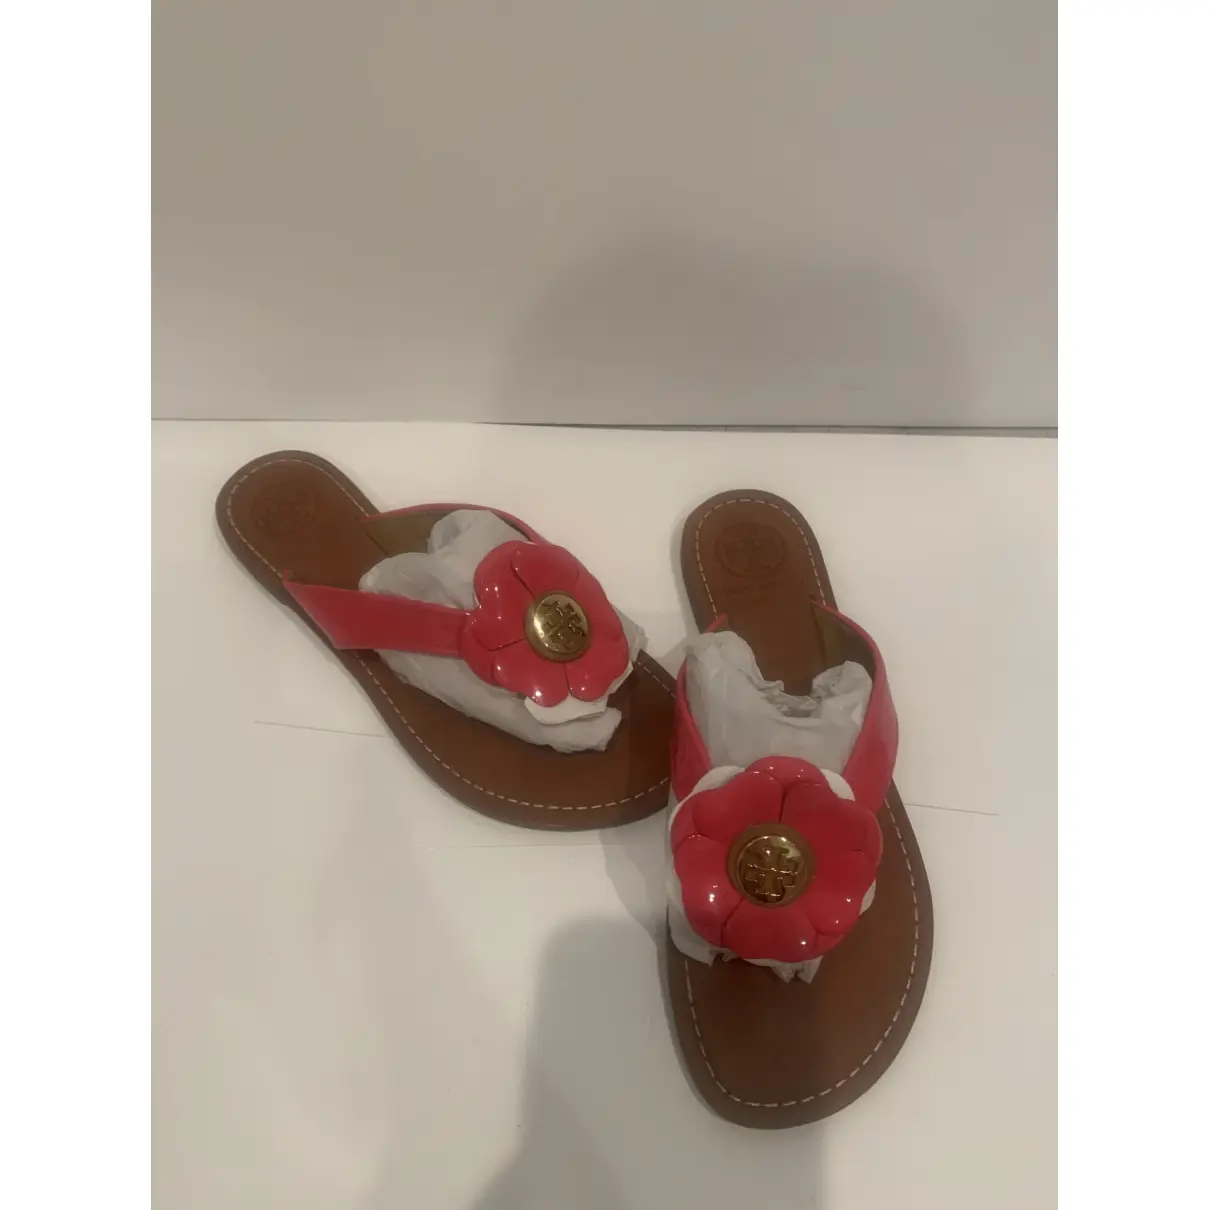 Buy Tory Burch Patent leather flip flops online